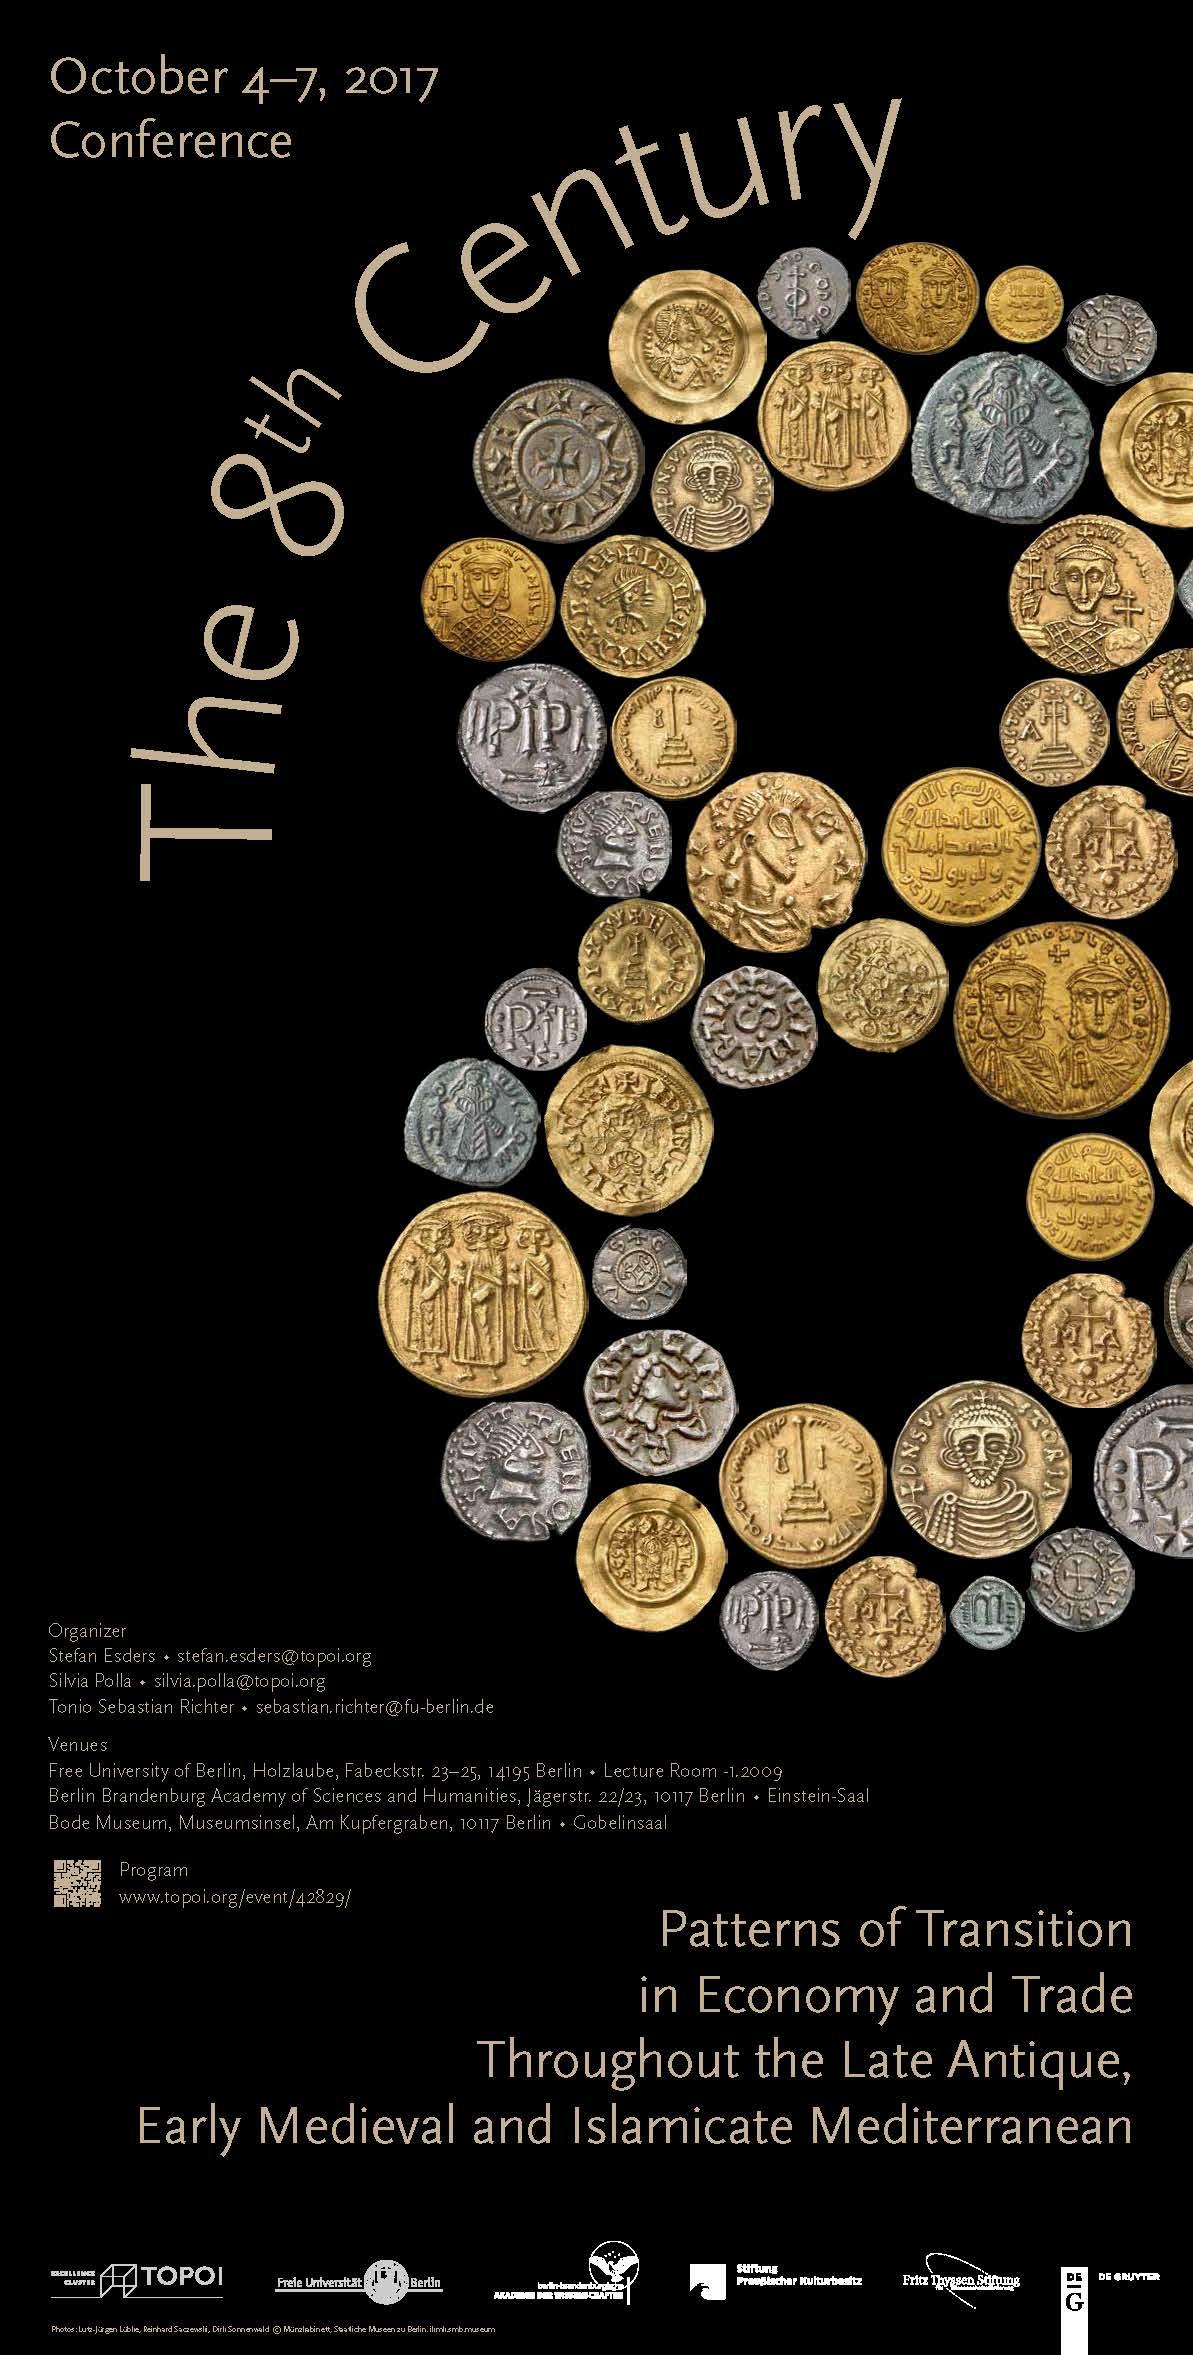 The 8th century__Poster